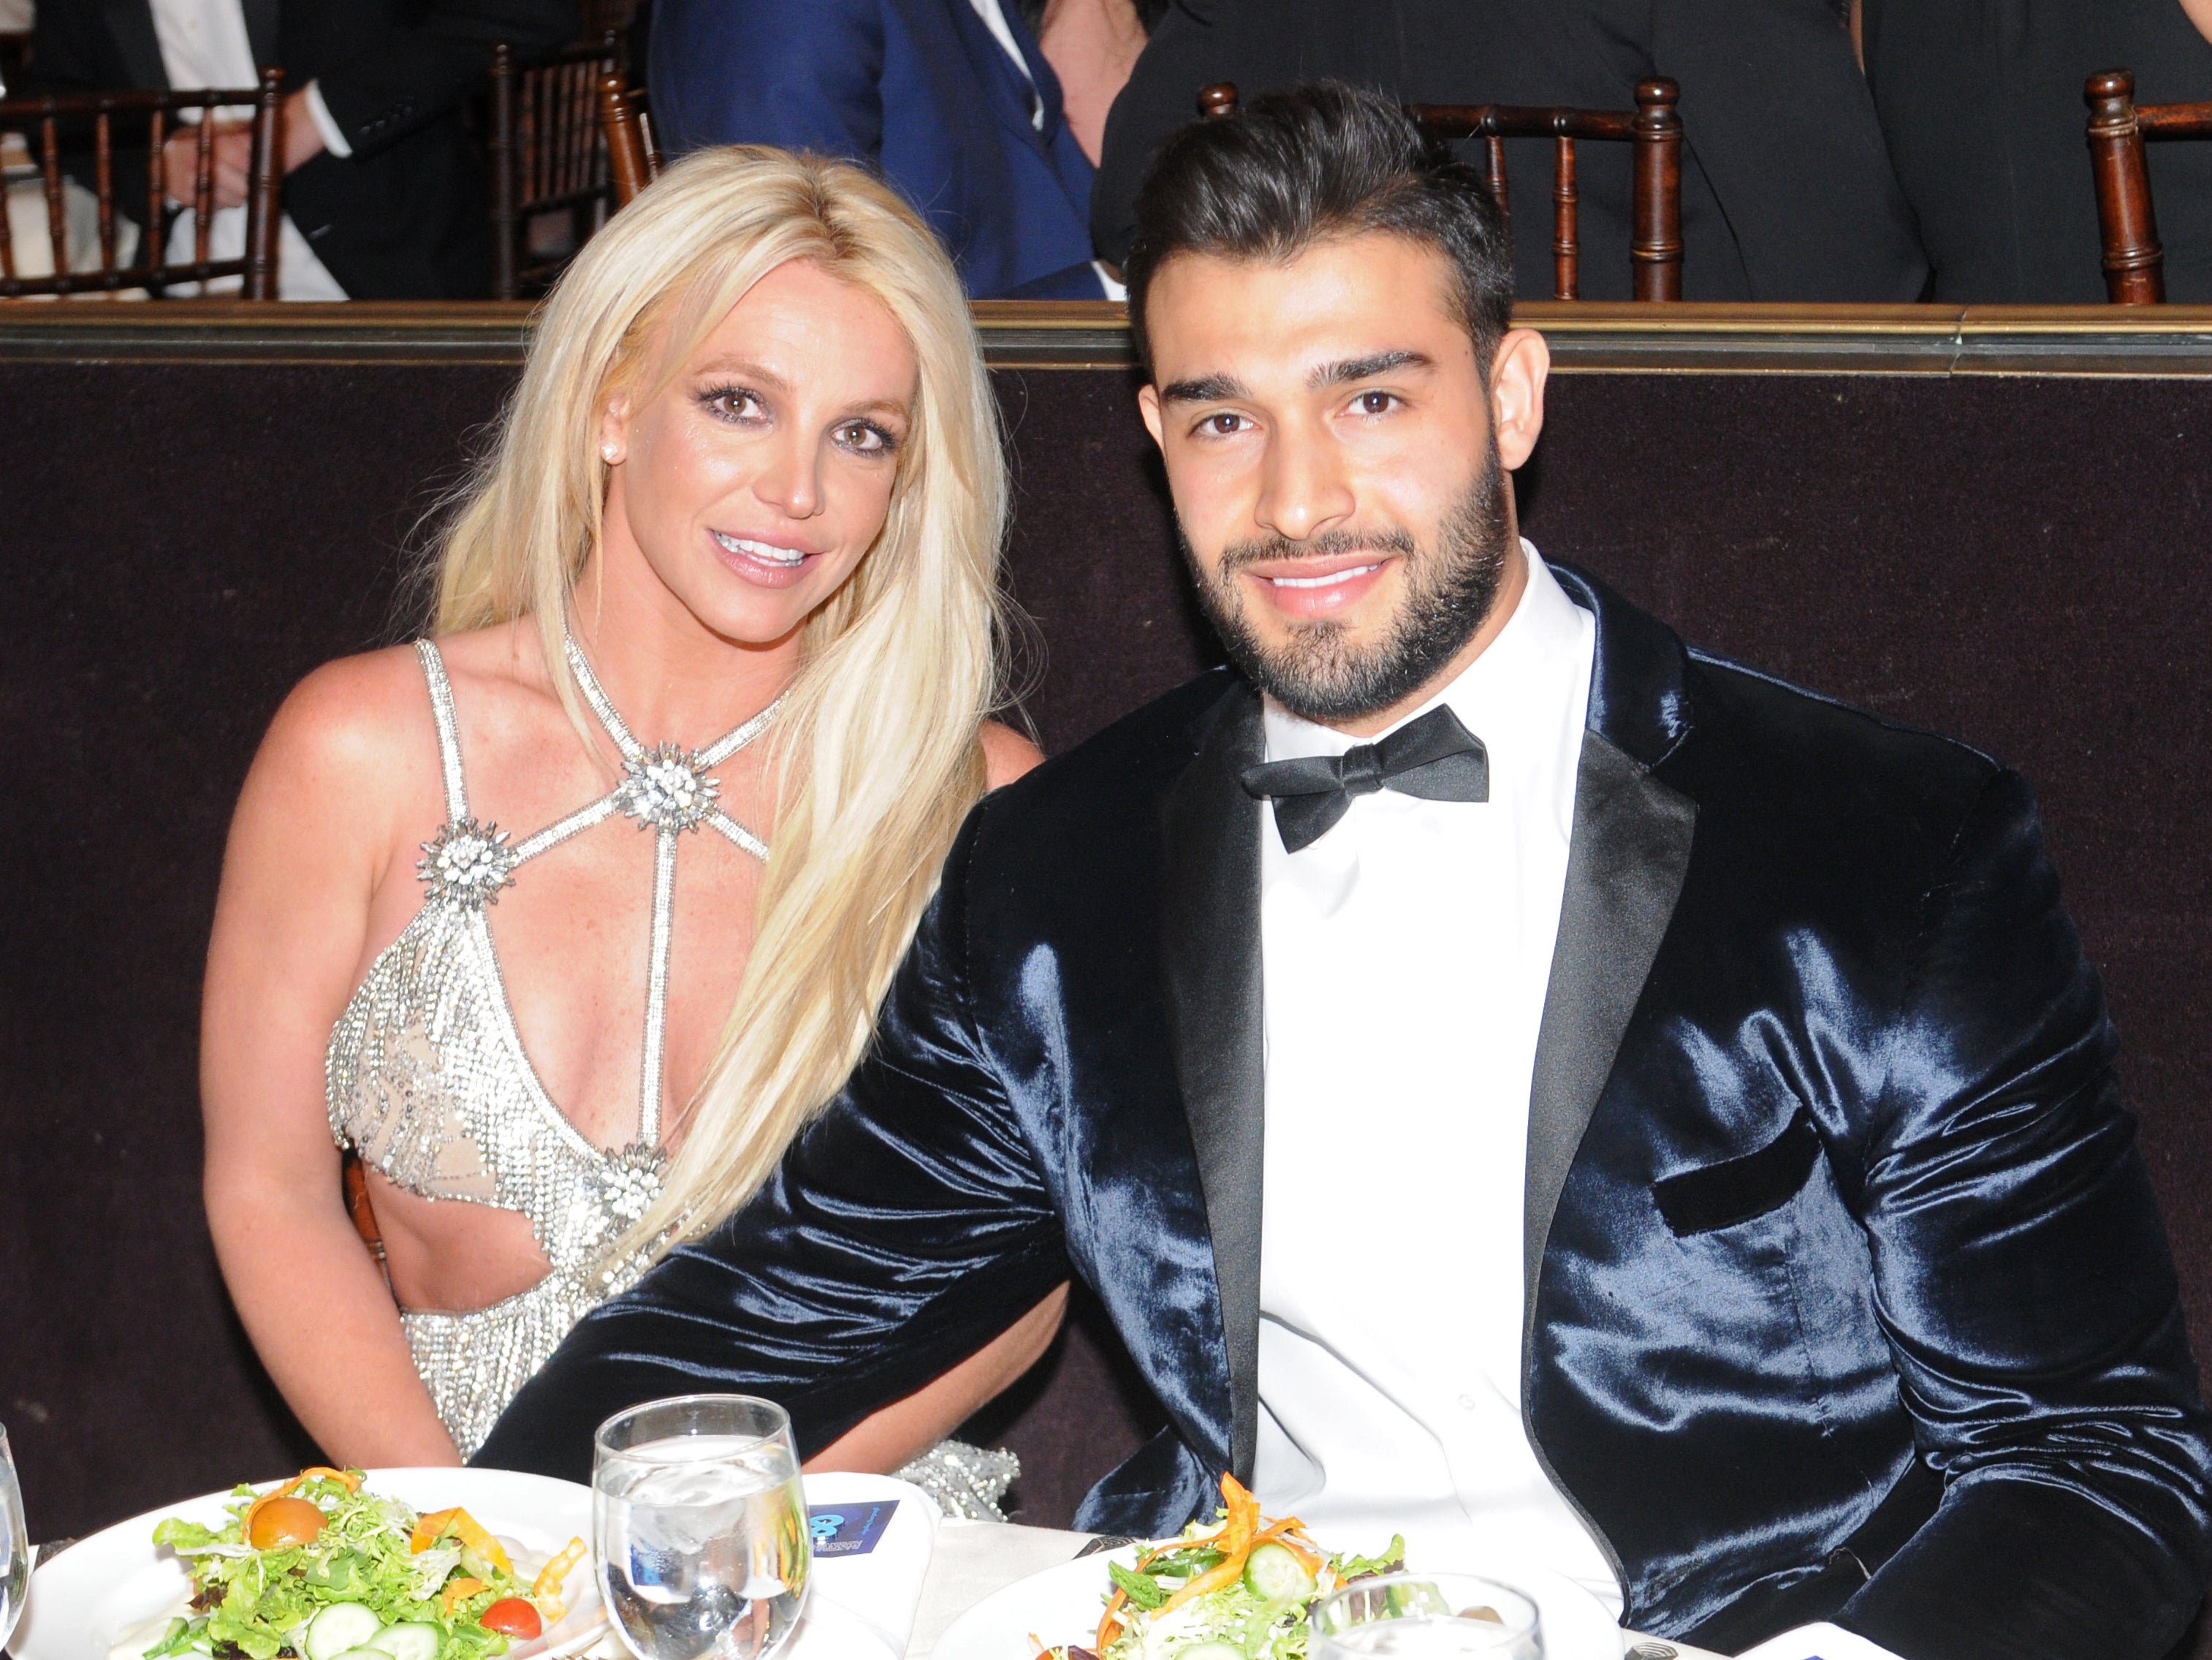 Infidelity rumours and prenuptial agreements Everything we know about Britney Spears and Sam Asghari divorce The Independent